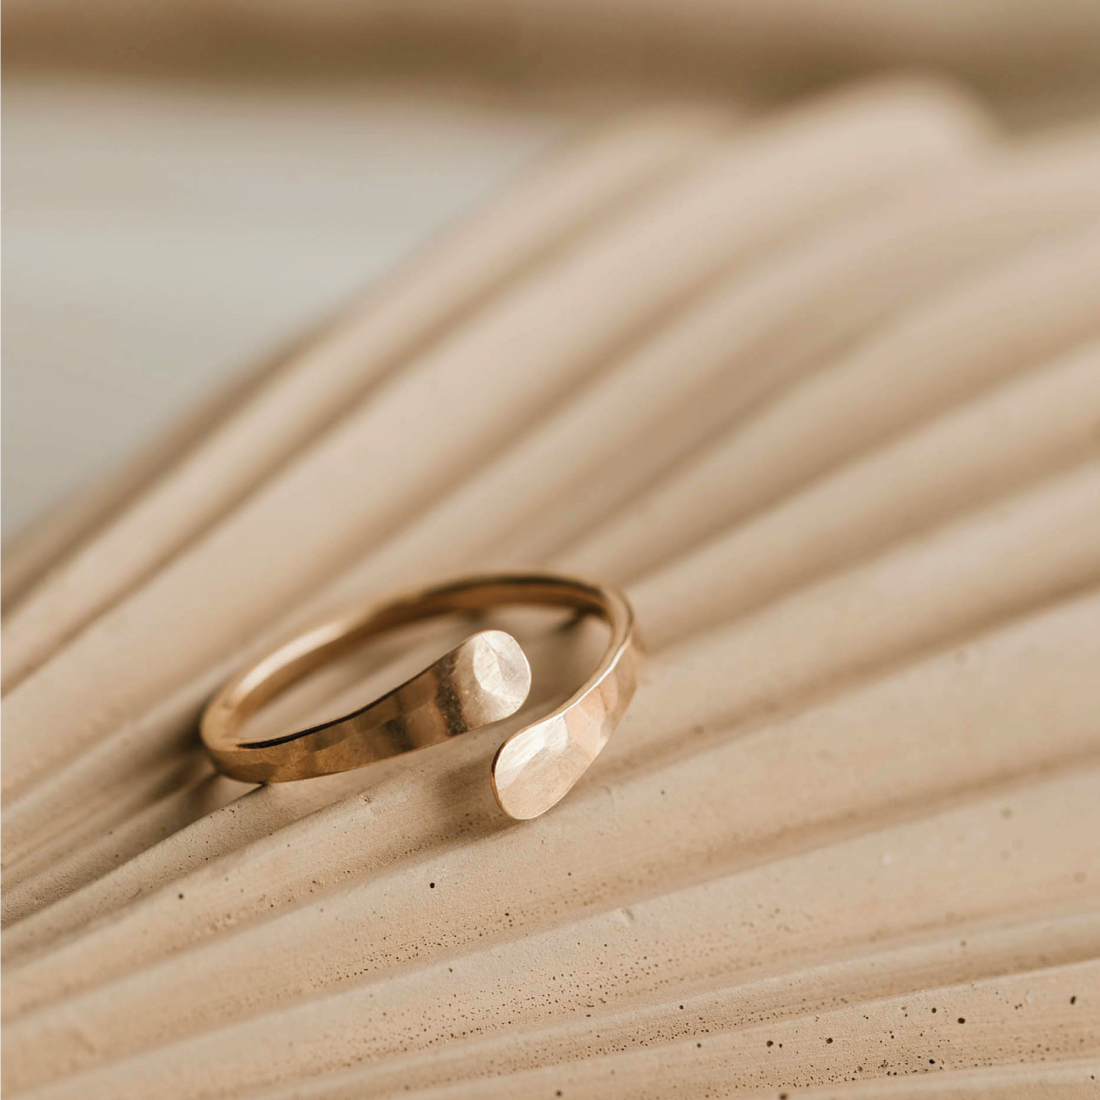 Sonder: How a New Word Added to the Dictionary Inspired a New Ring